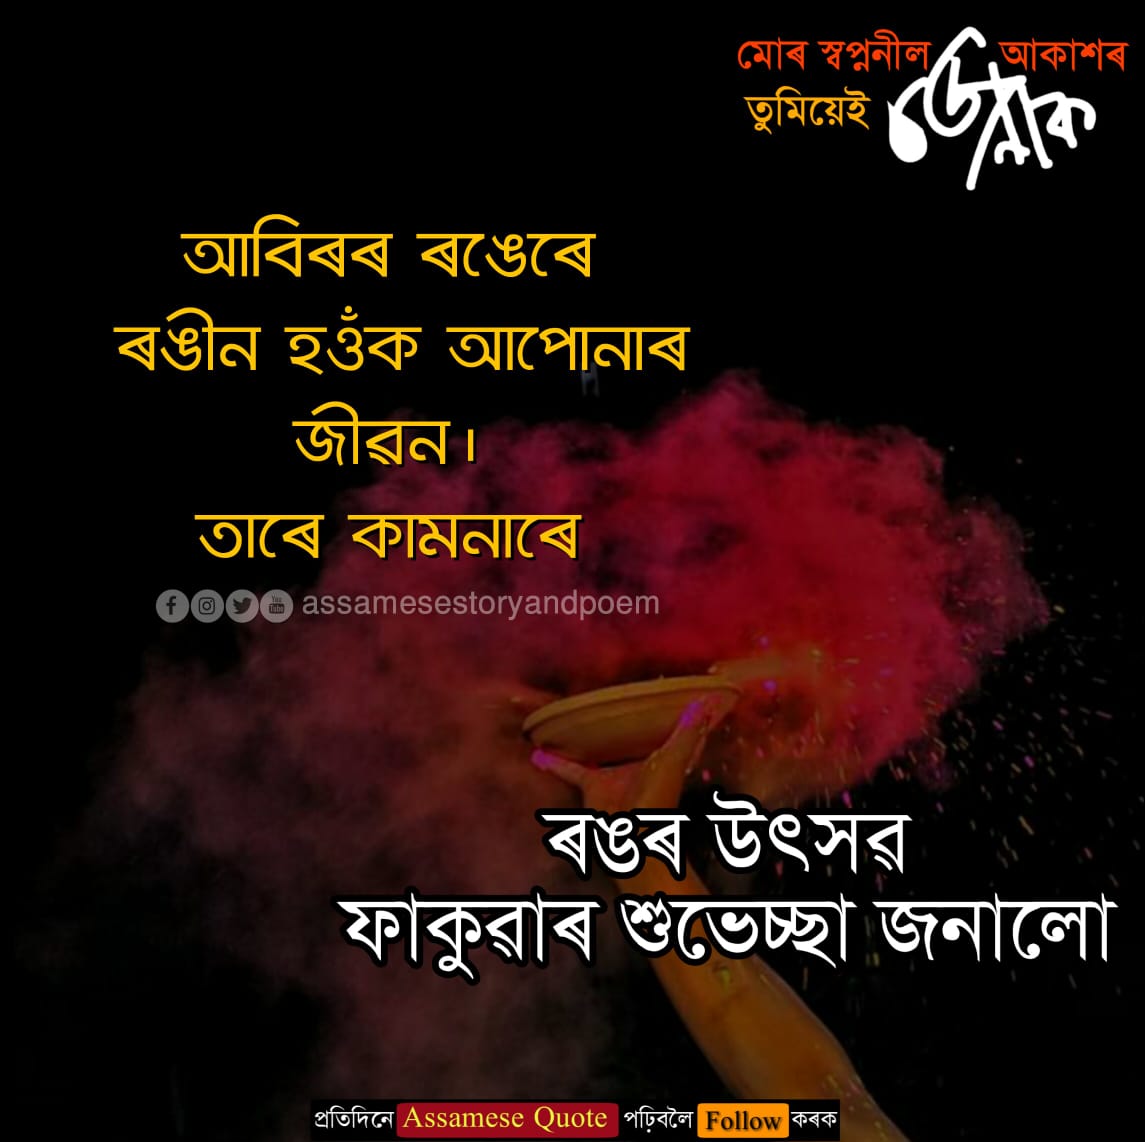 Happy Holi Assamese Quote Assamese Sms, Caption, Song Download - JonakAxom-  Assamese Quotes, Blogging , Business Ideas, Tips And Tricks